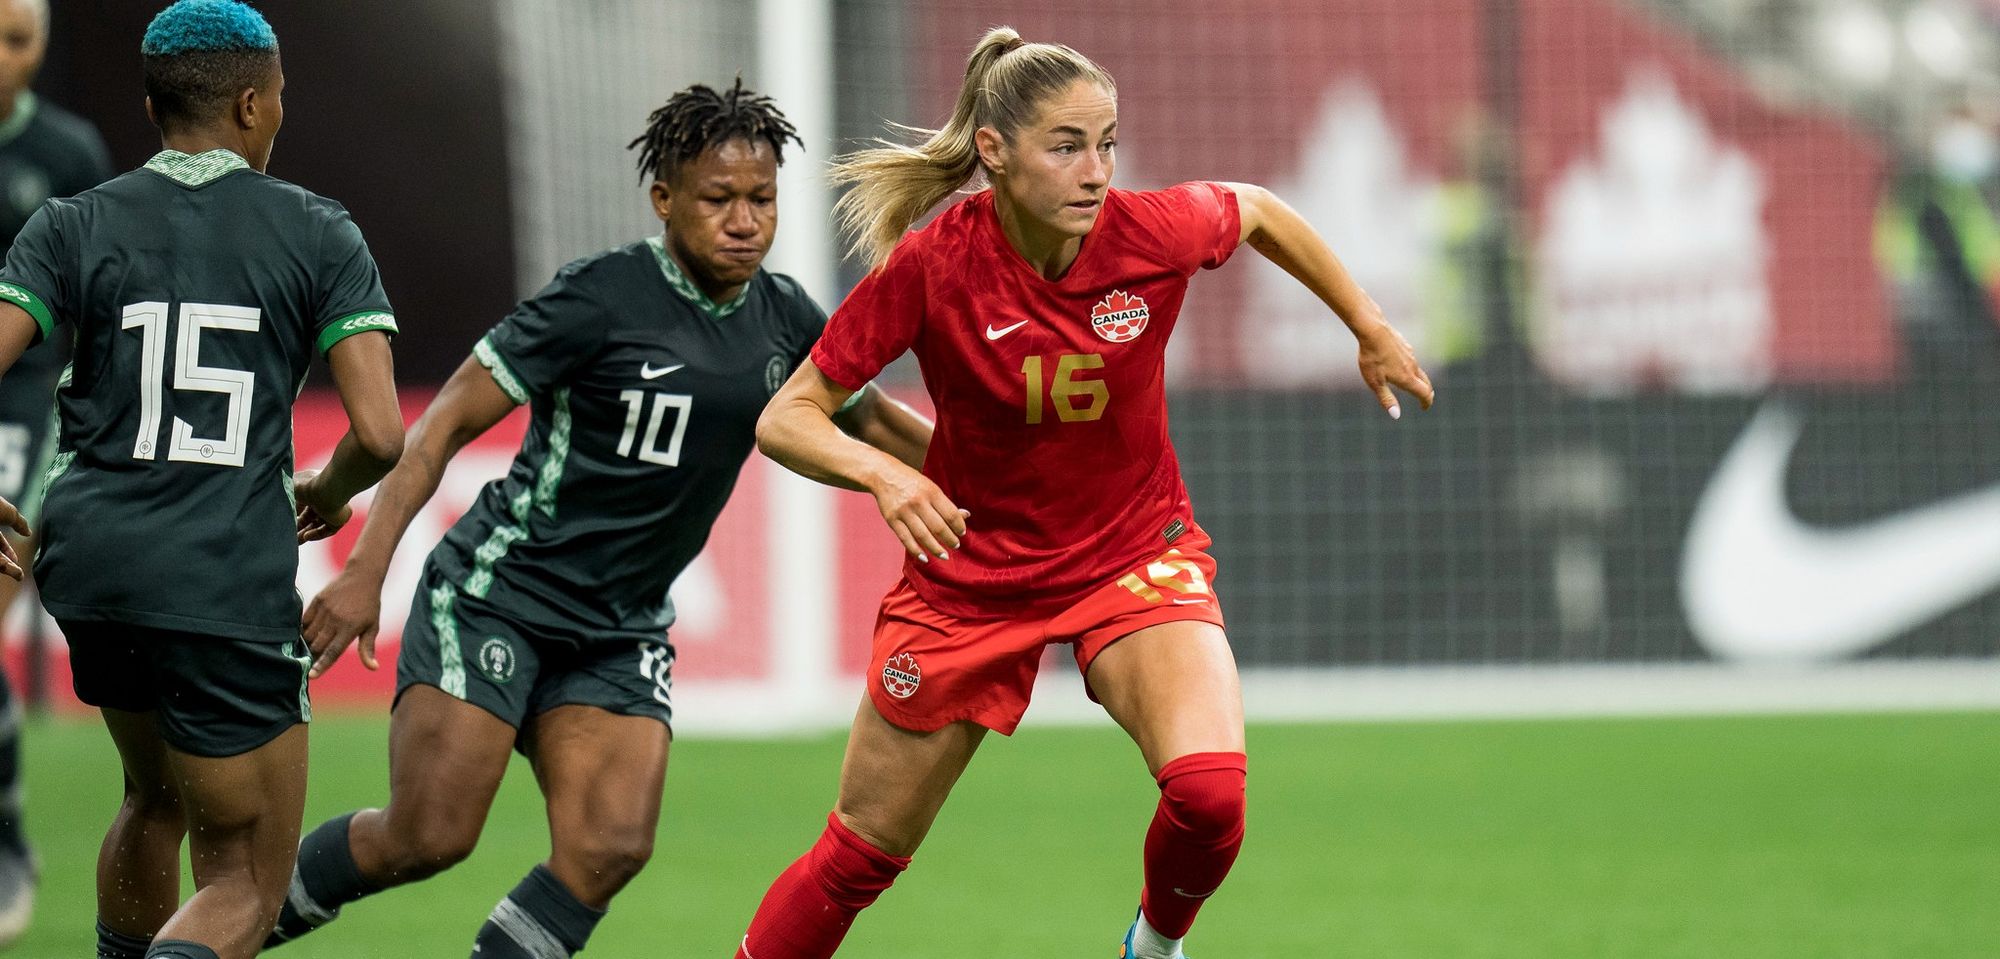 CanWNT Talk: A big win for Canada on a special night